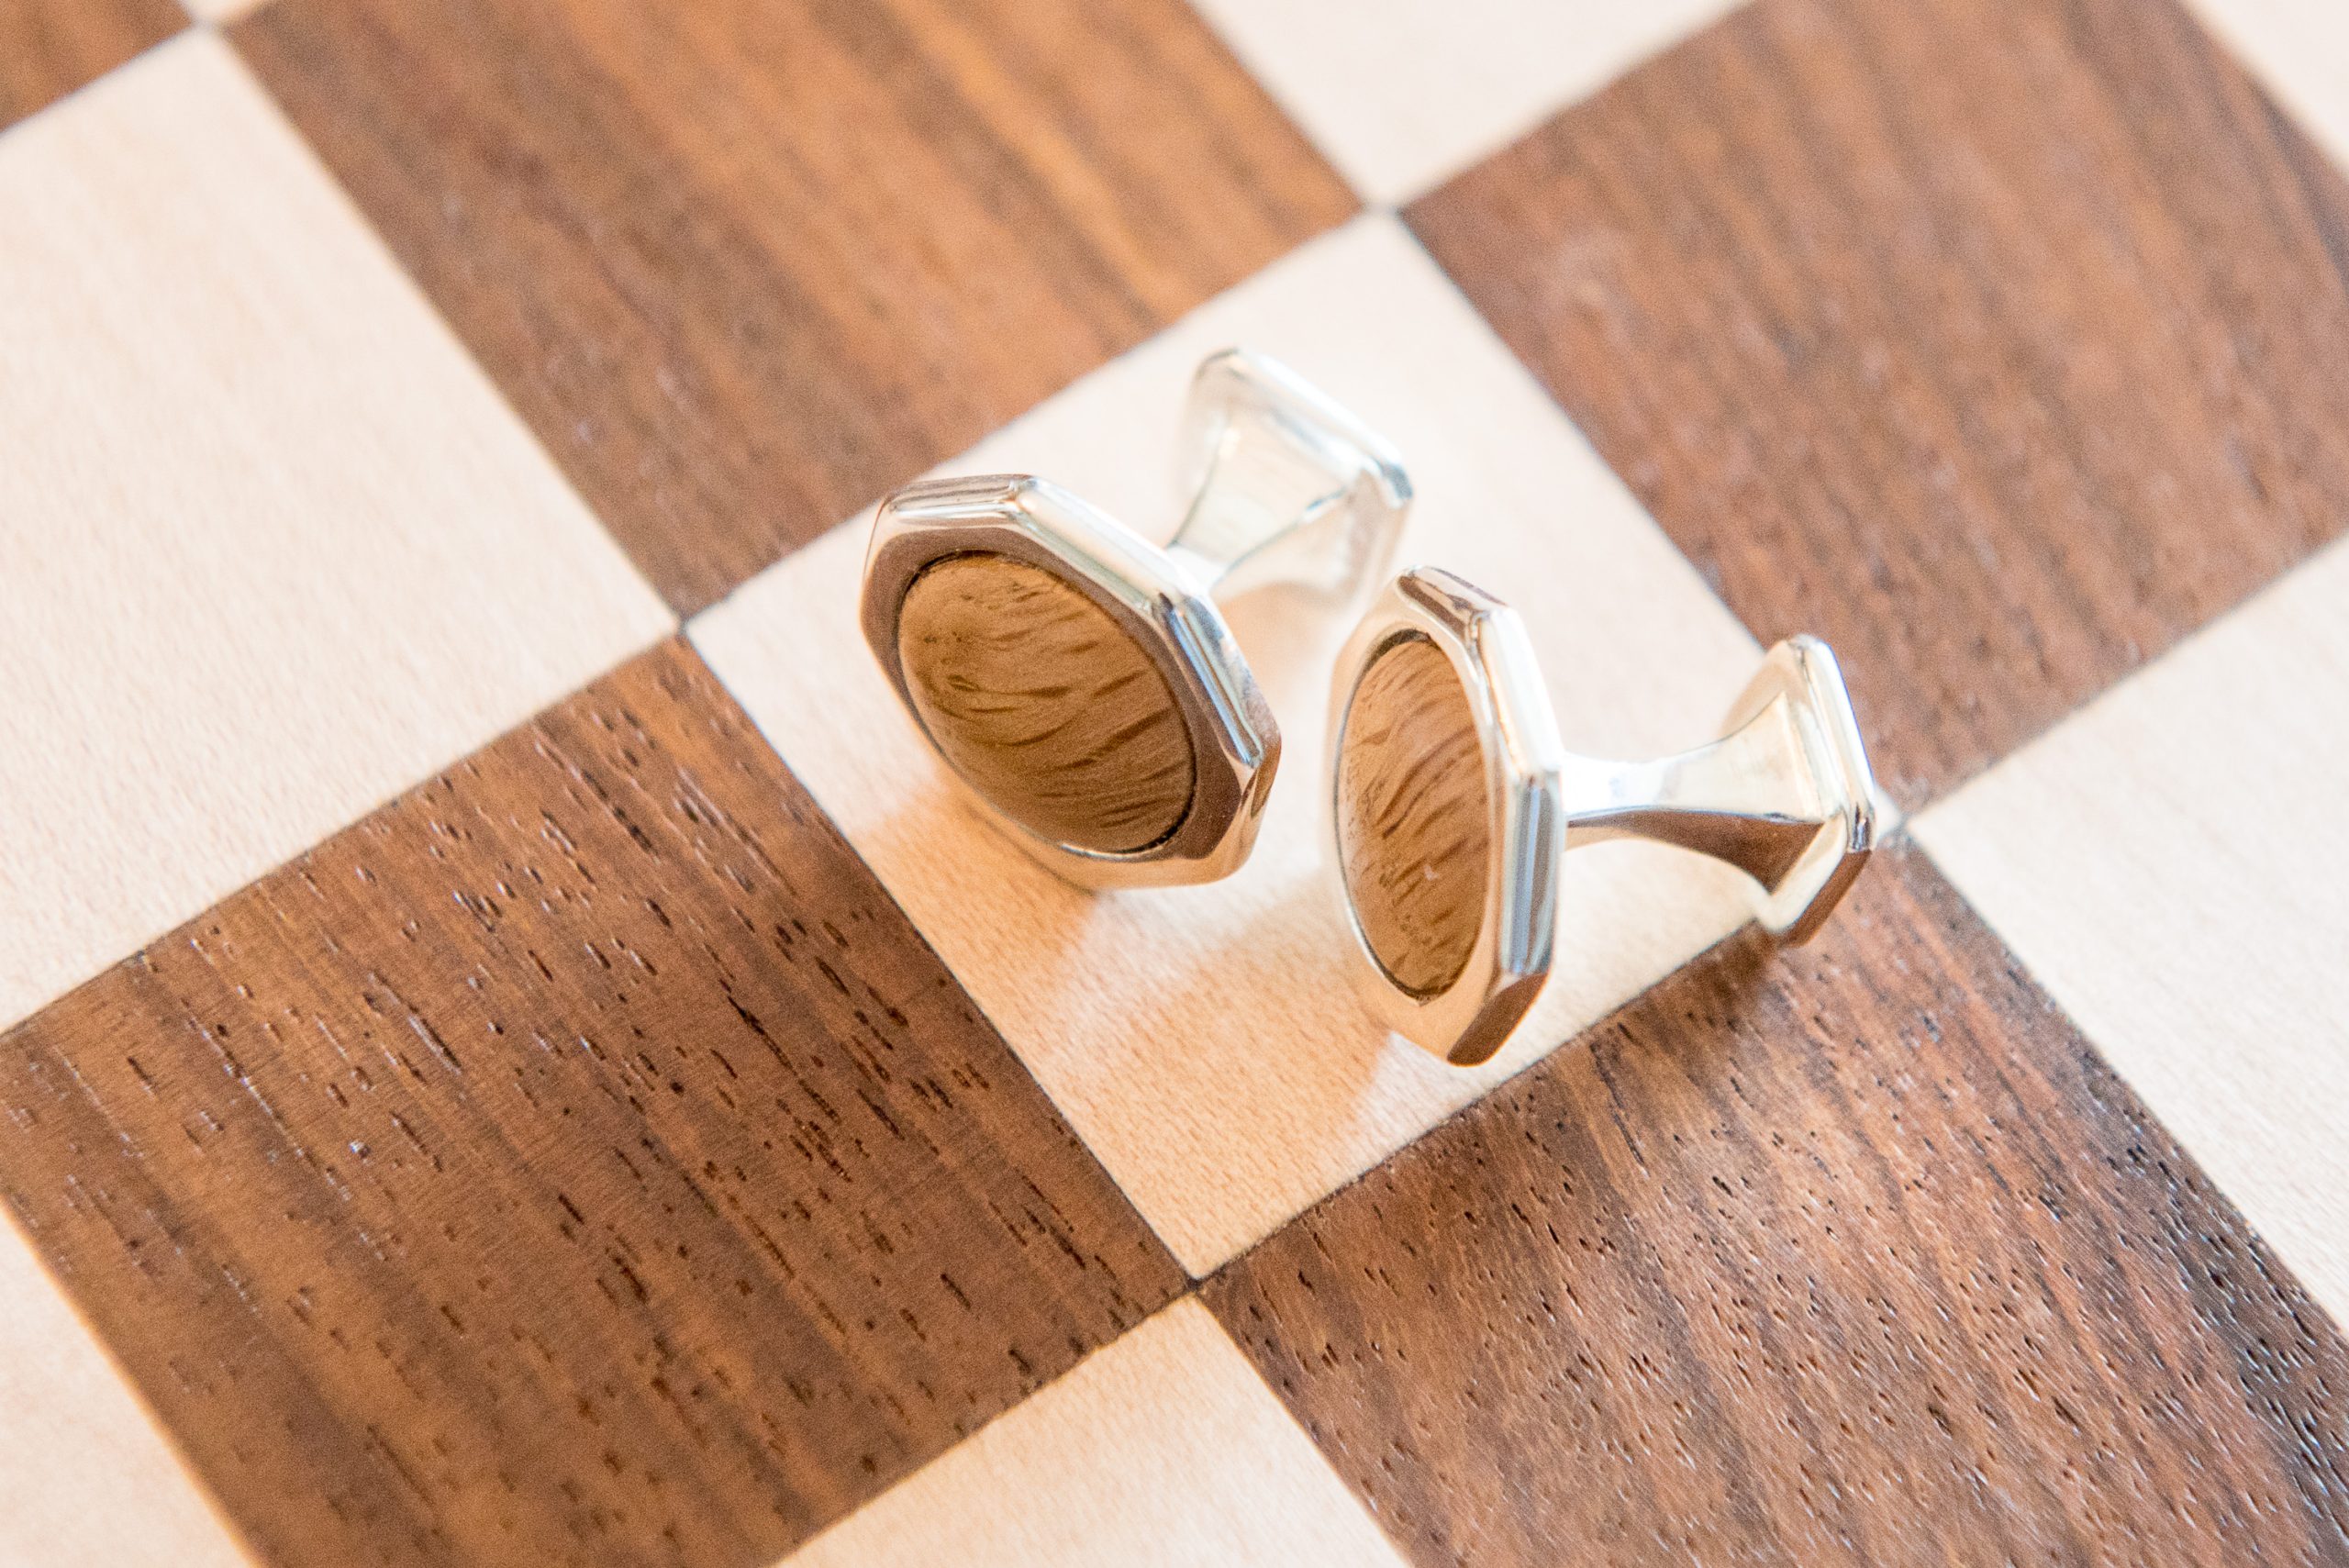 The Adare Manor oak and silver cufflinks—a small piece of Ireland on your wrists. Photo courtesy of Adare Manor